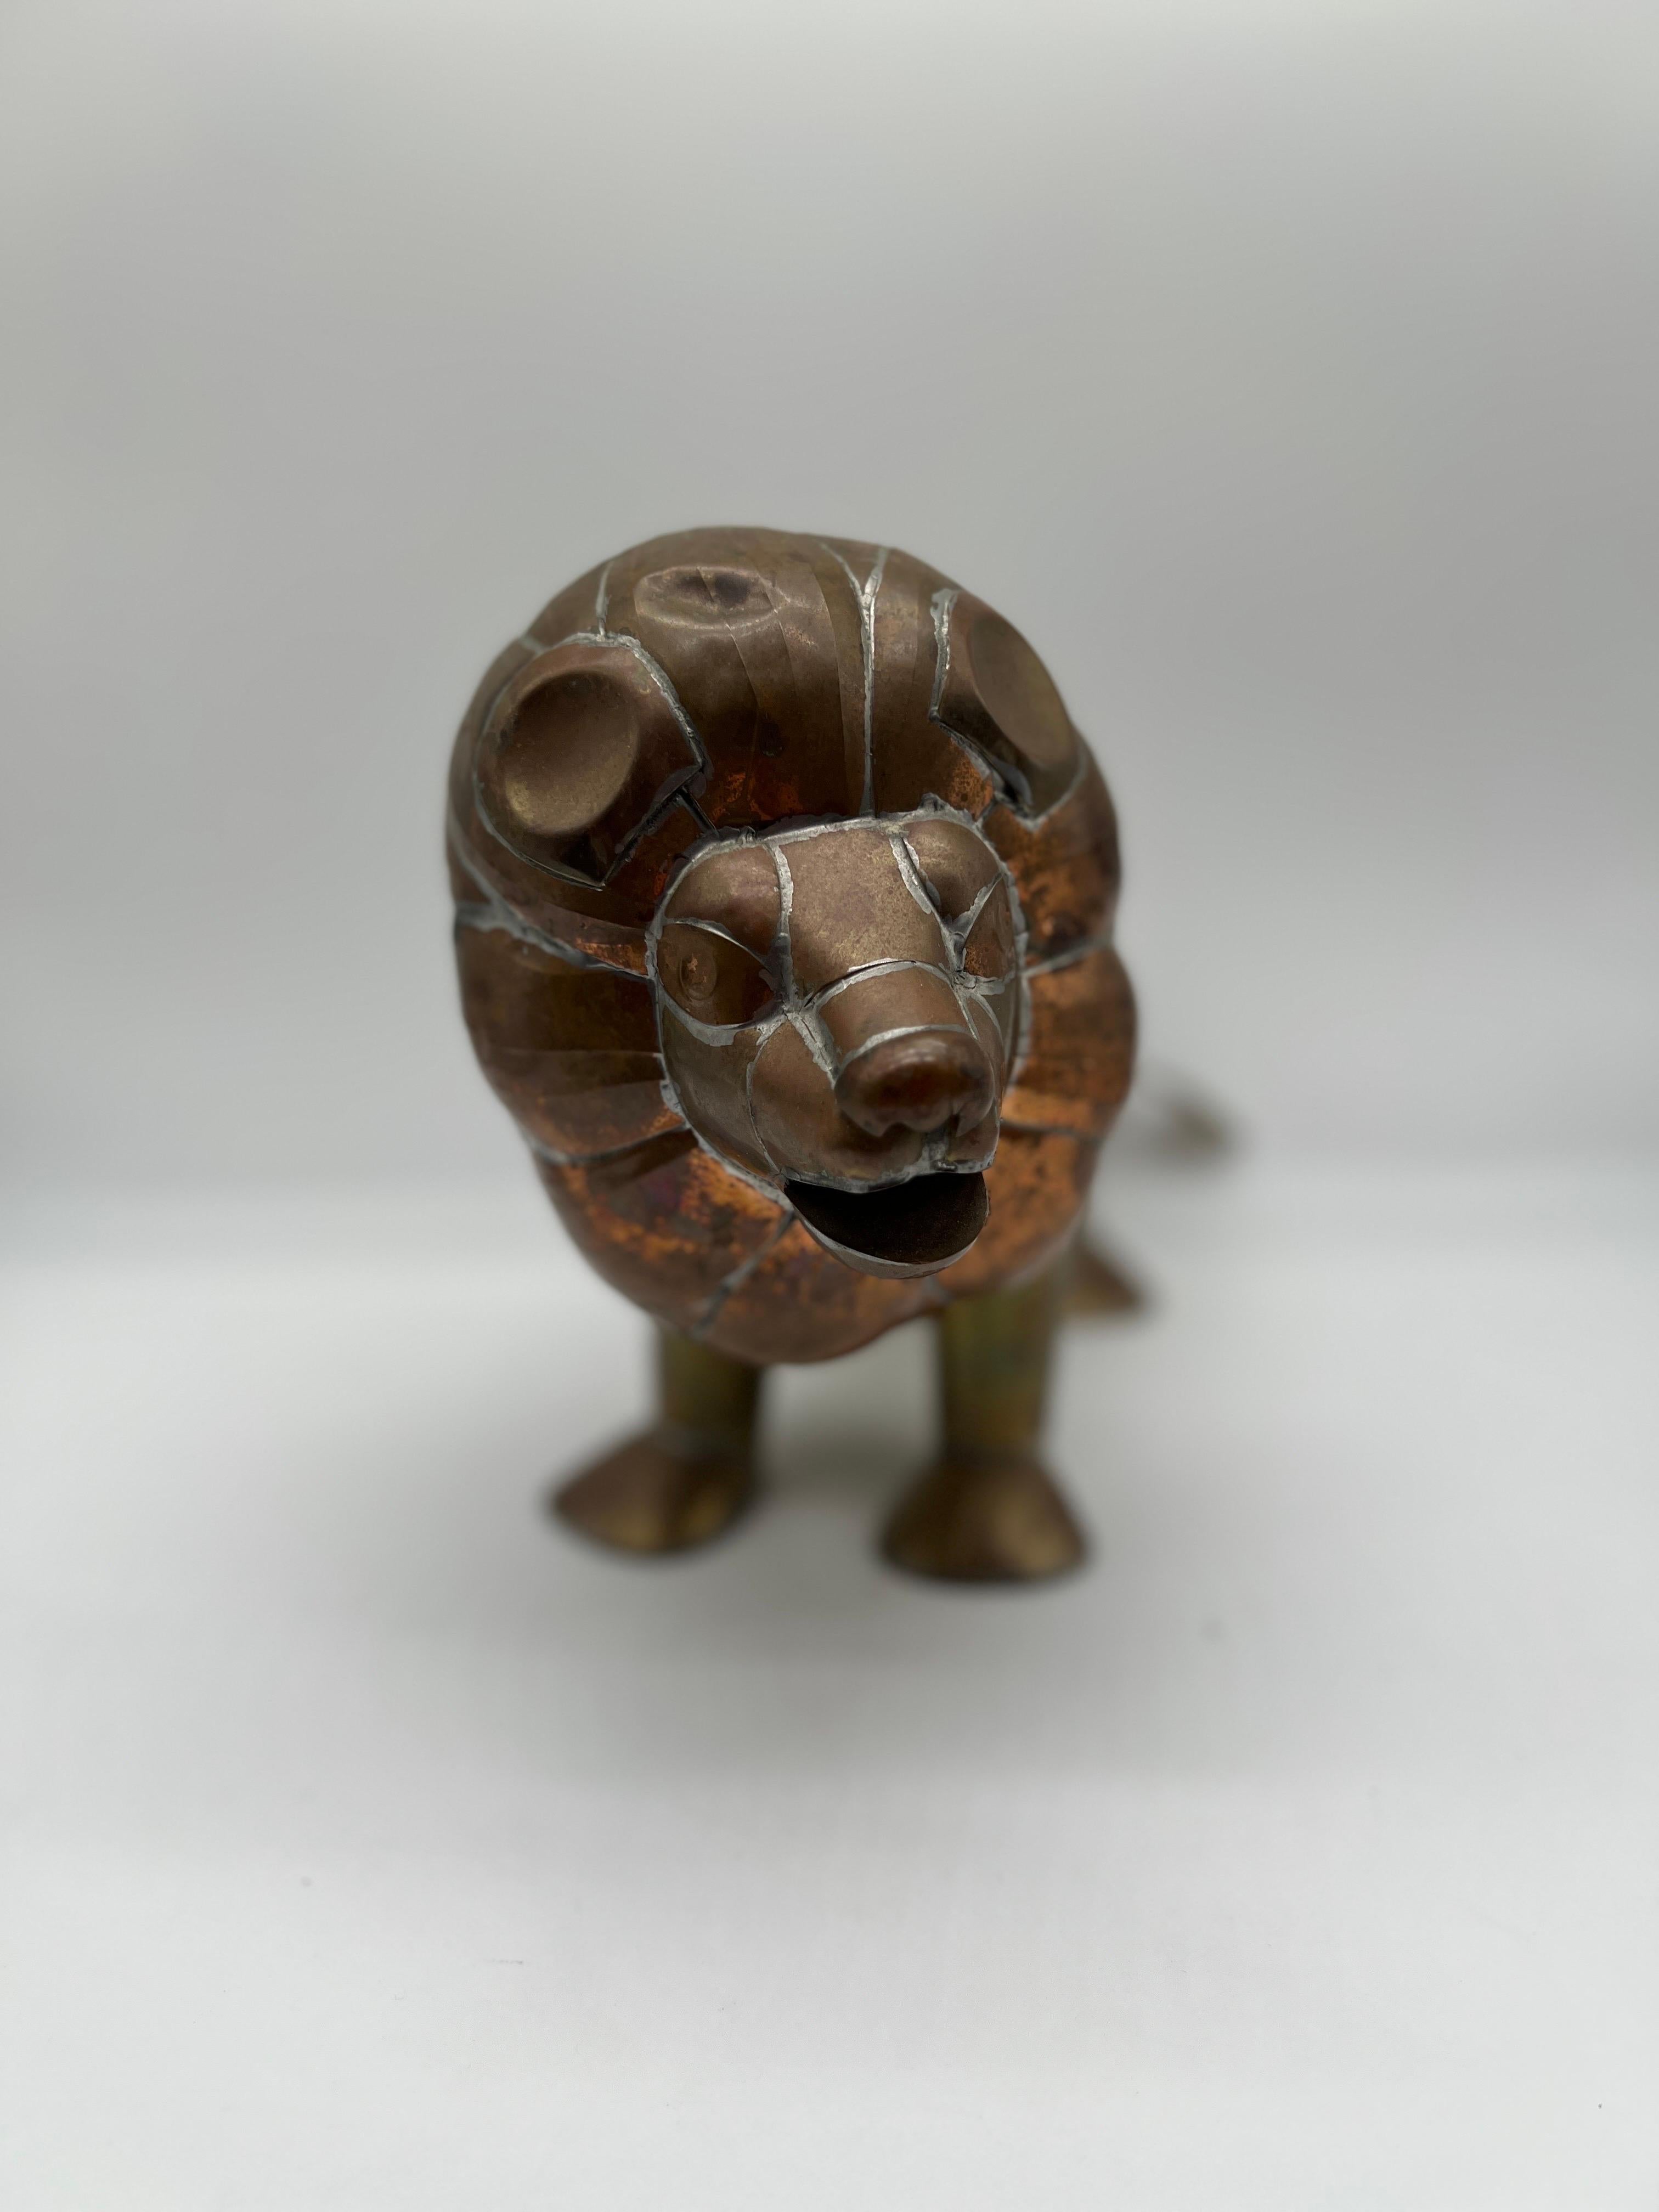 Attributed to: Sergio Bustamante (Mexican, born 1949), circa 1970. 
The lion features the unique work Bustamante is known for, constructed of traditional copper and brass. The tail is removable and has a small welding dot to underside as most